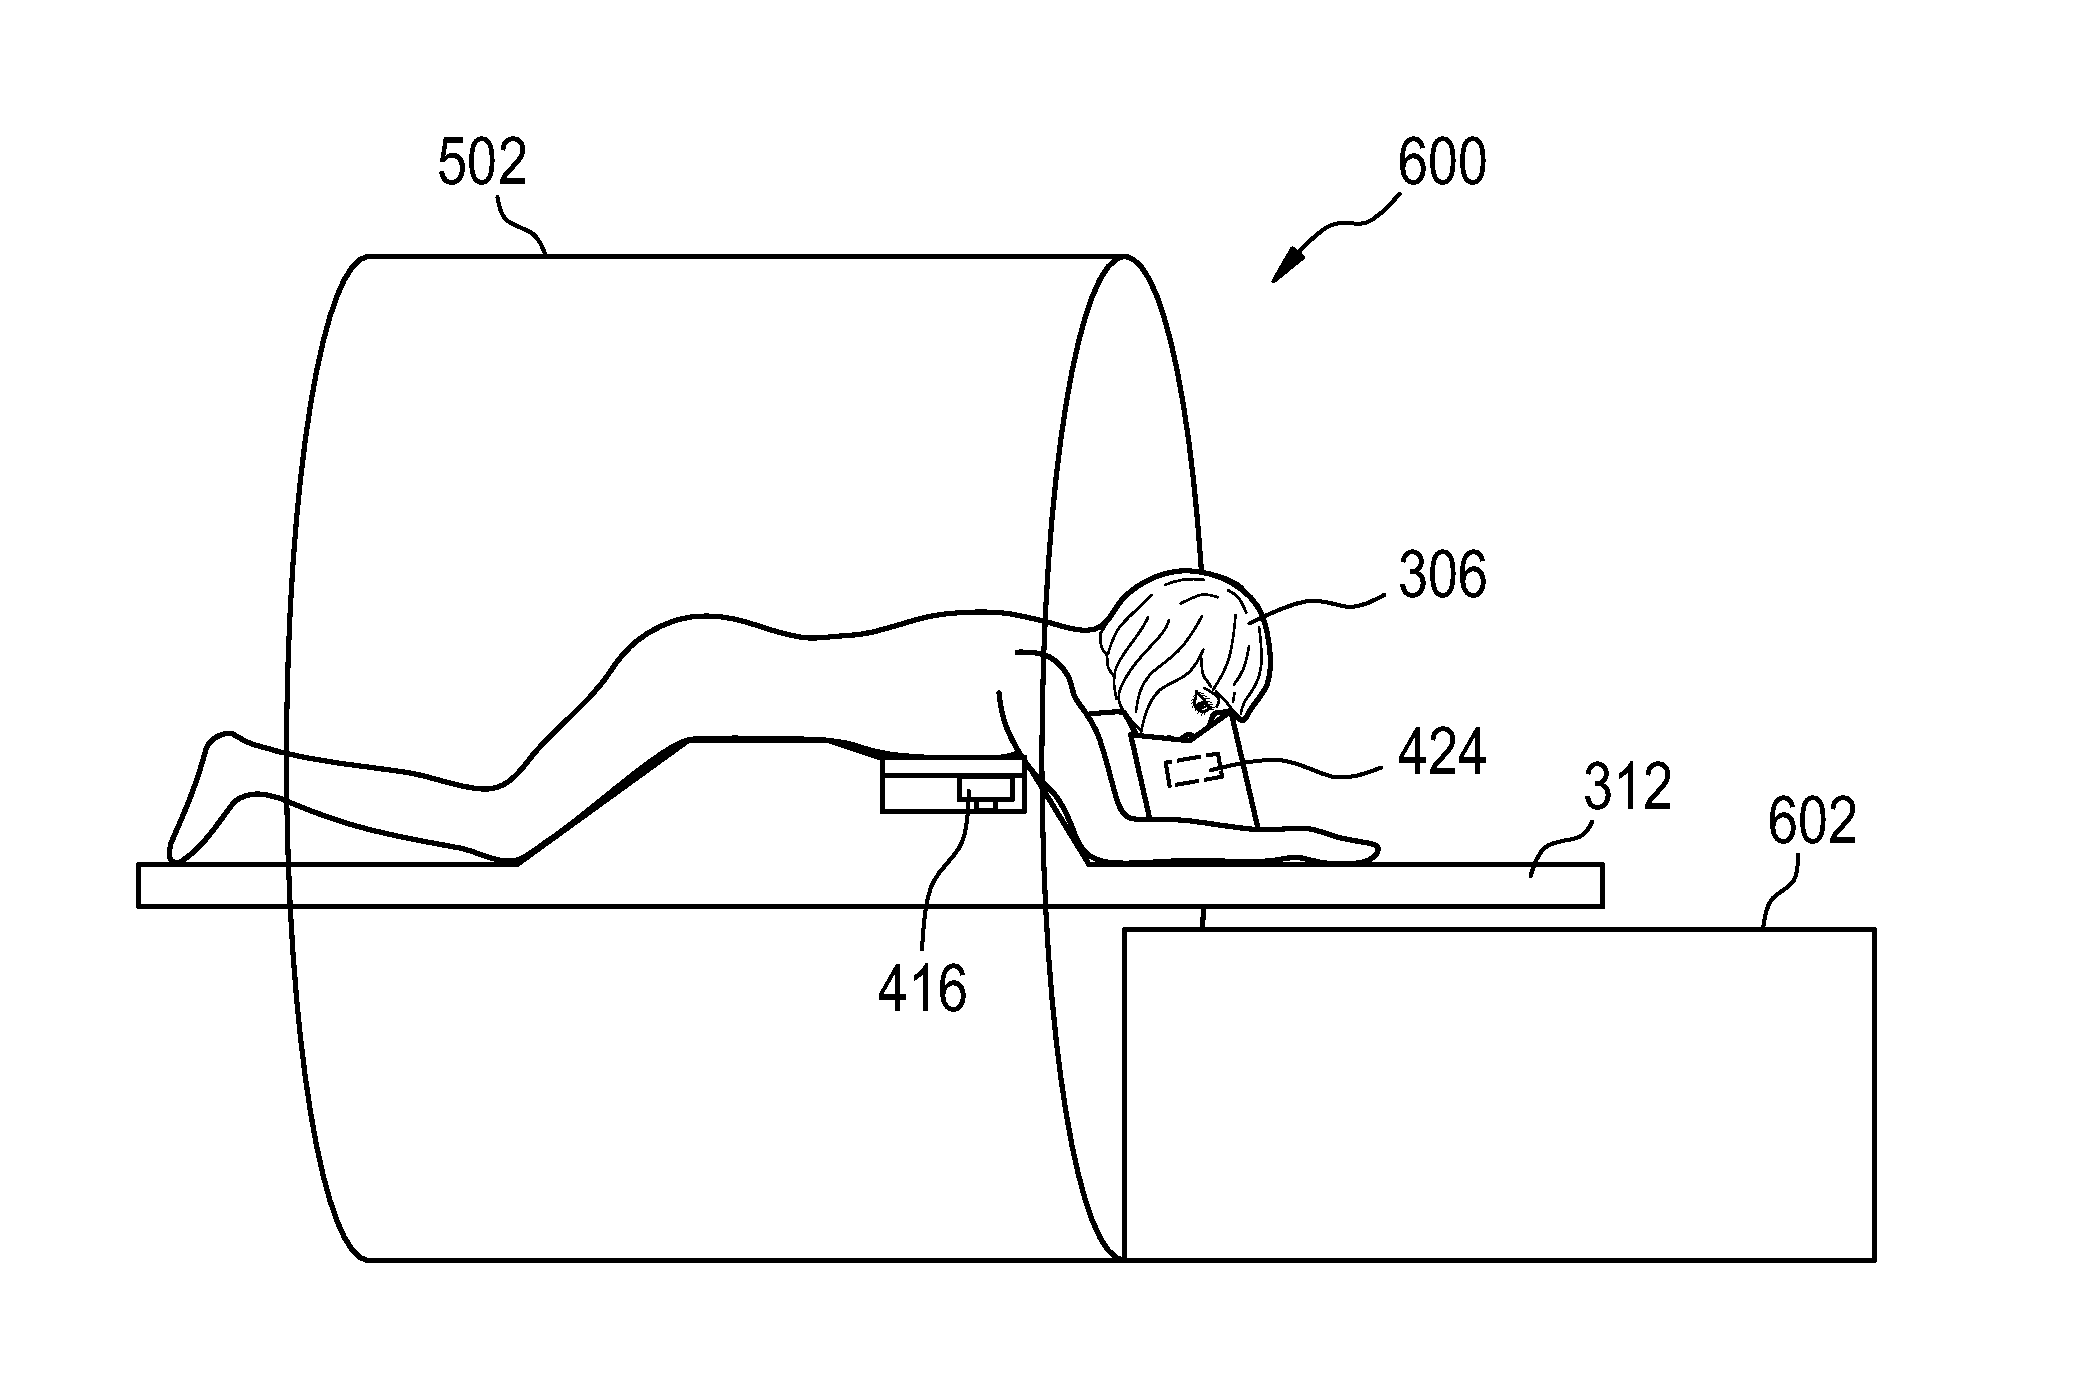 Therapeutic apparatus, computer-implemented method, and computer program product for controlling the focus of radiation into a moving target zone